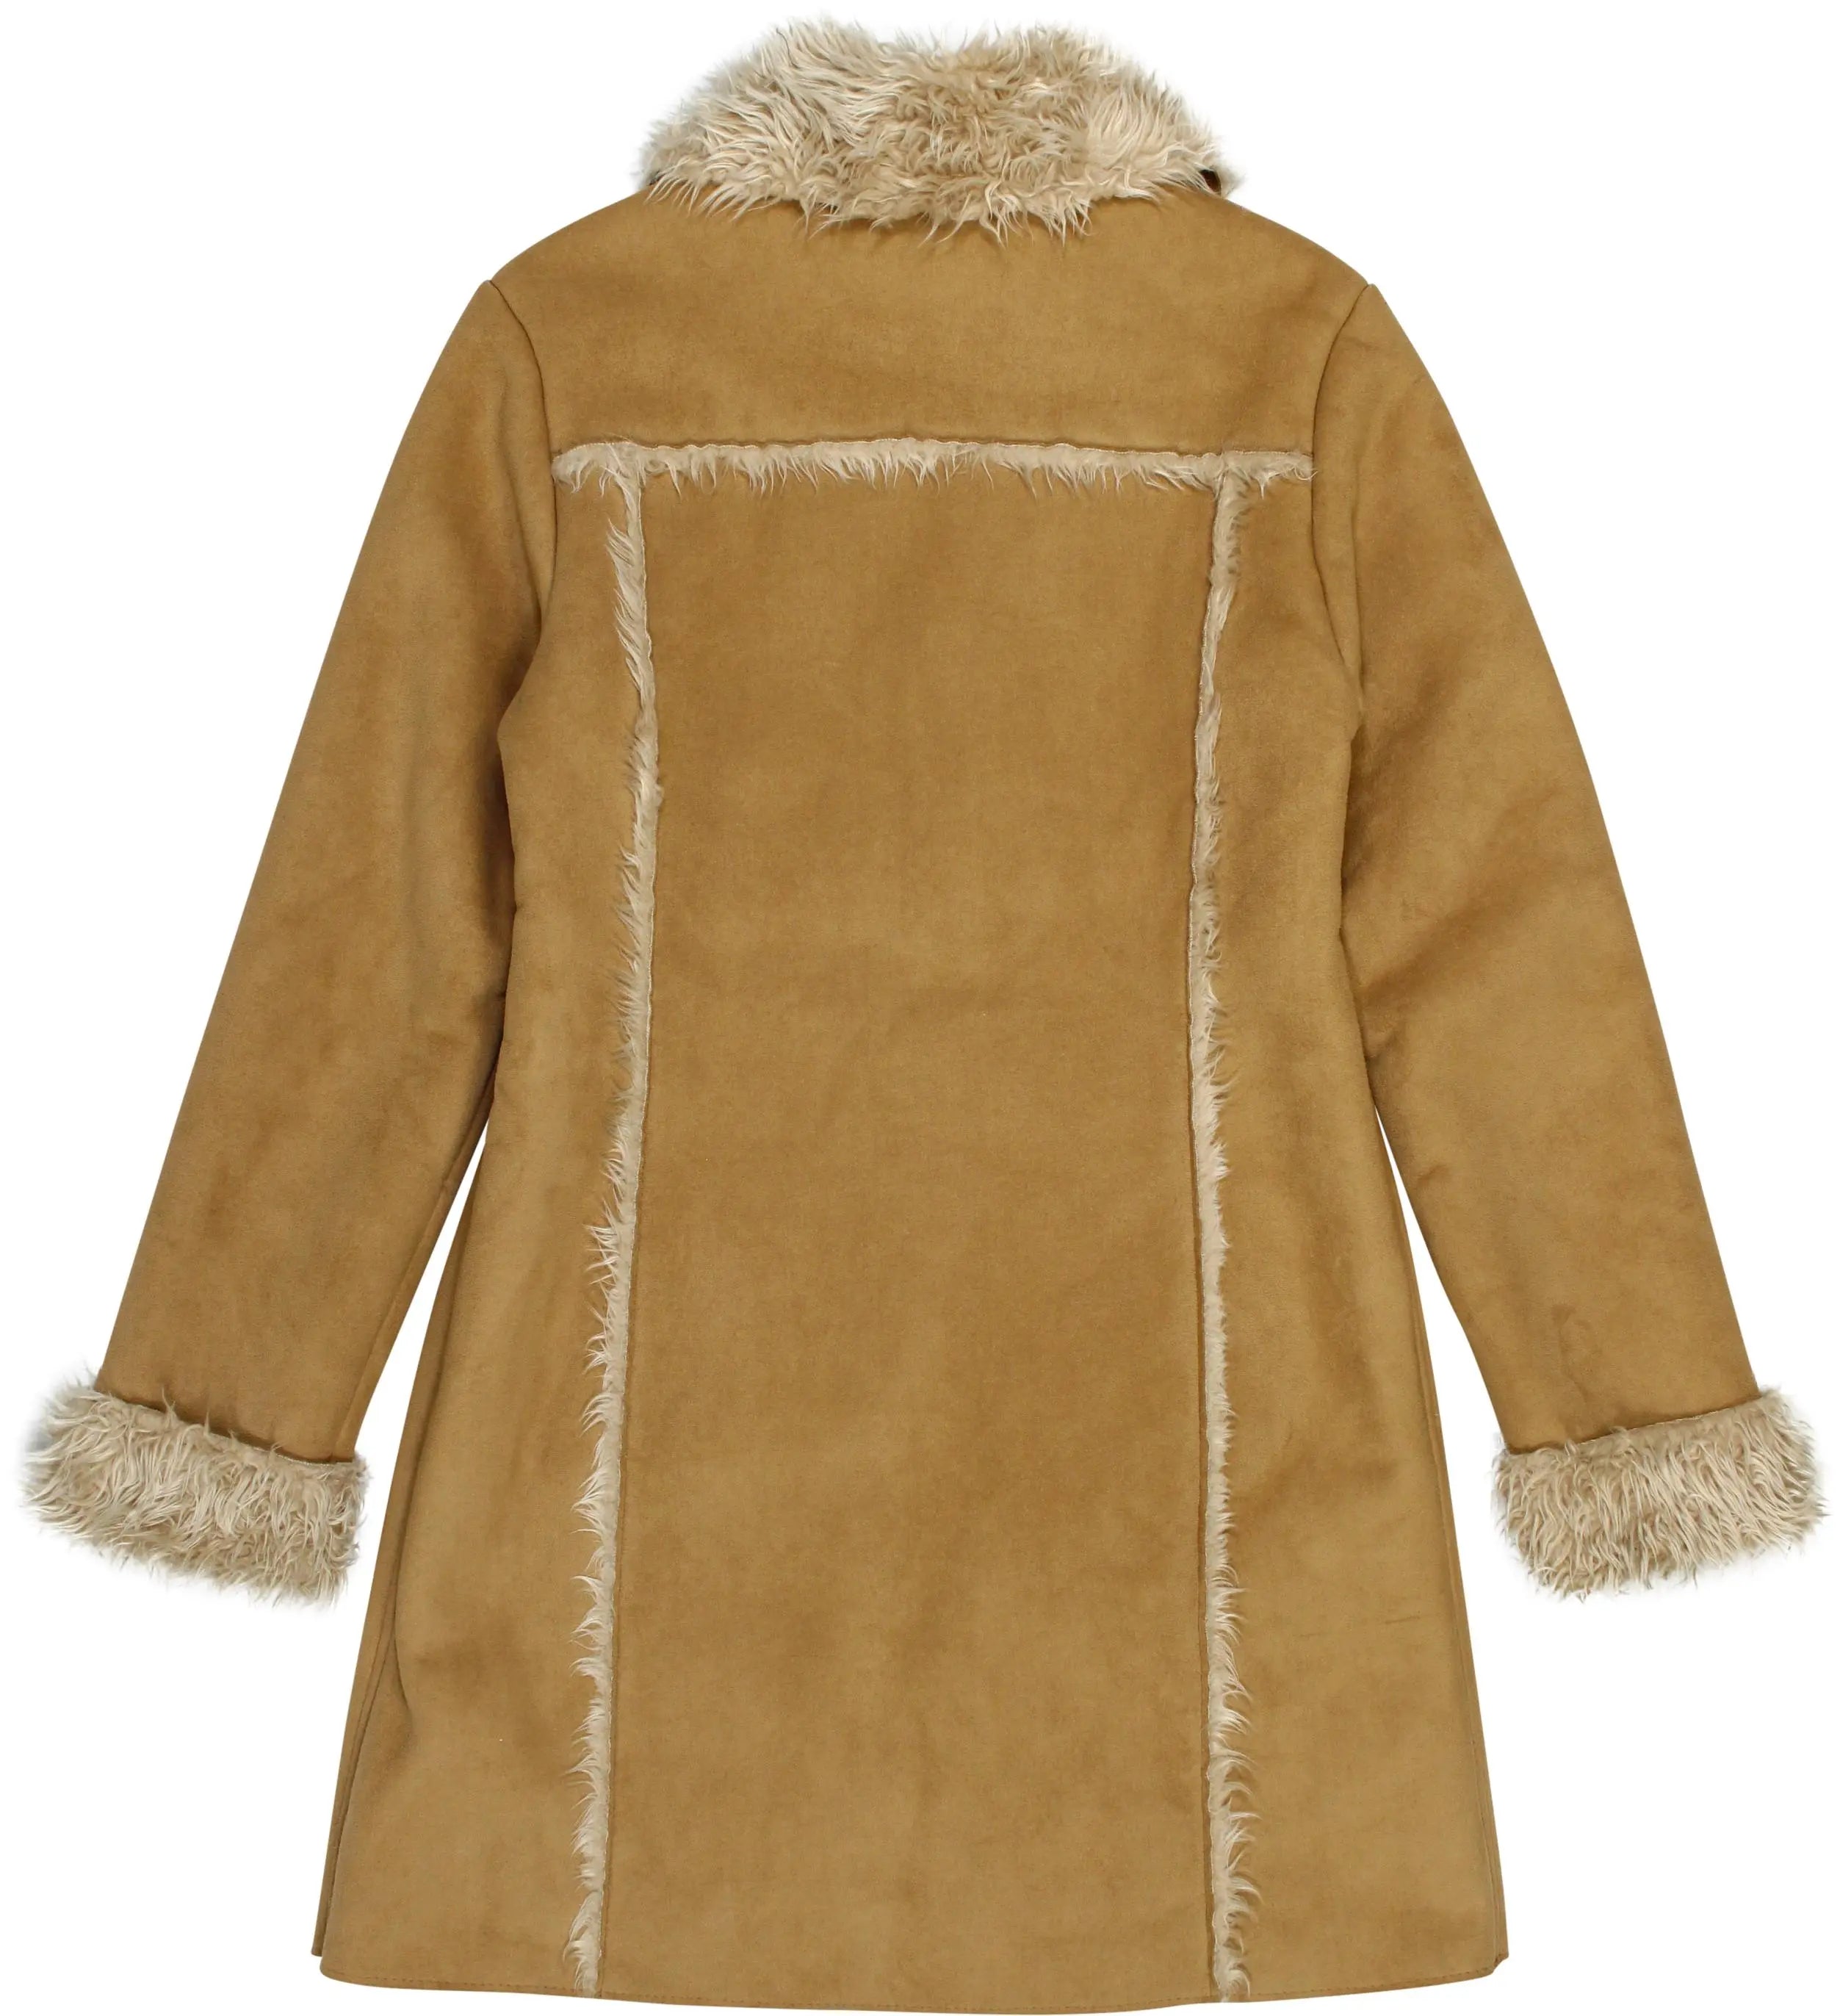 Rino & Pelle - 00s Lammy Coat with Embroided Details- ThriftTale.com - Vintage and second handclothing